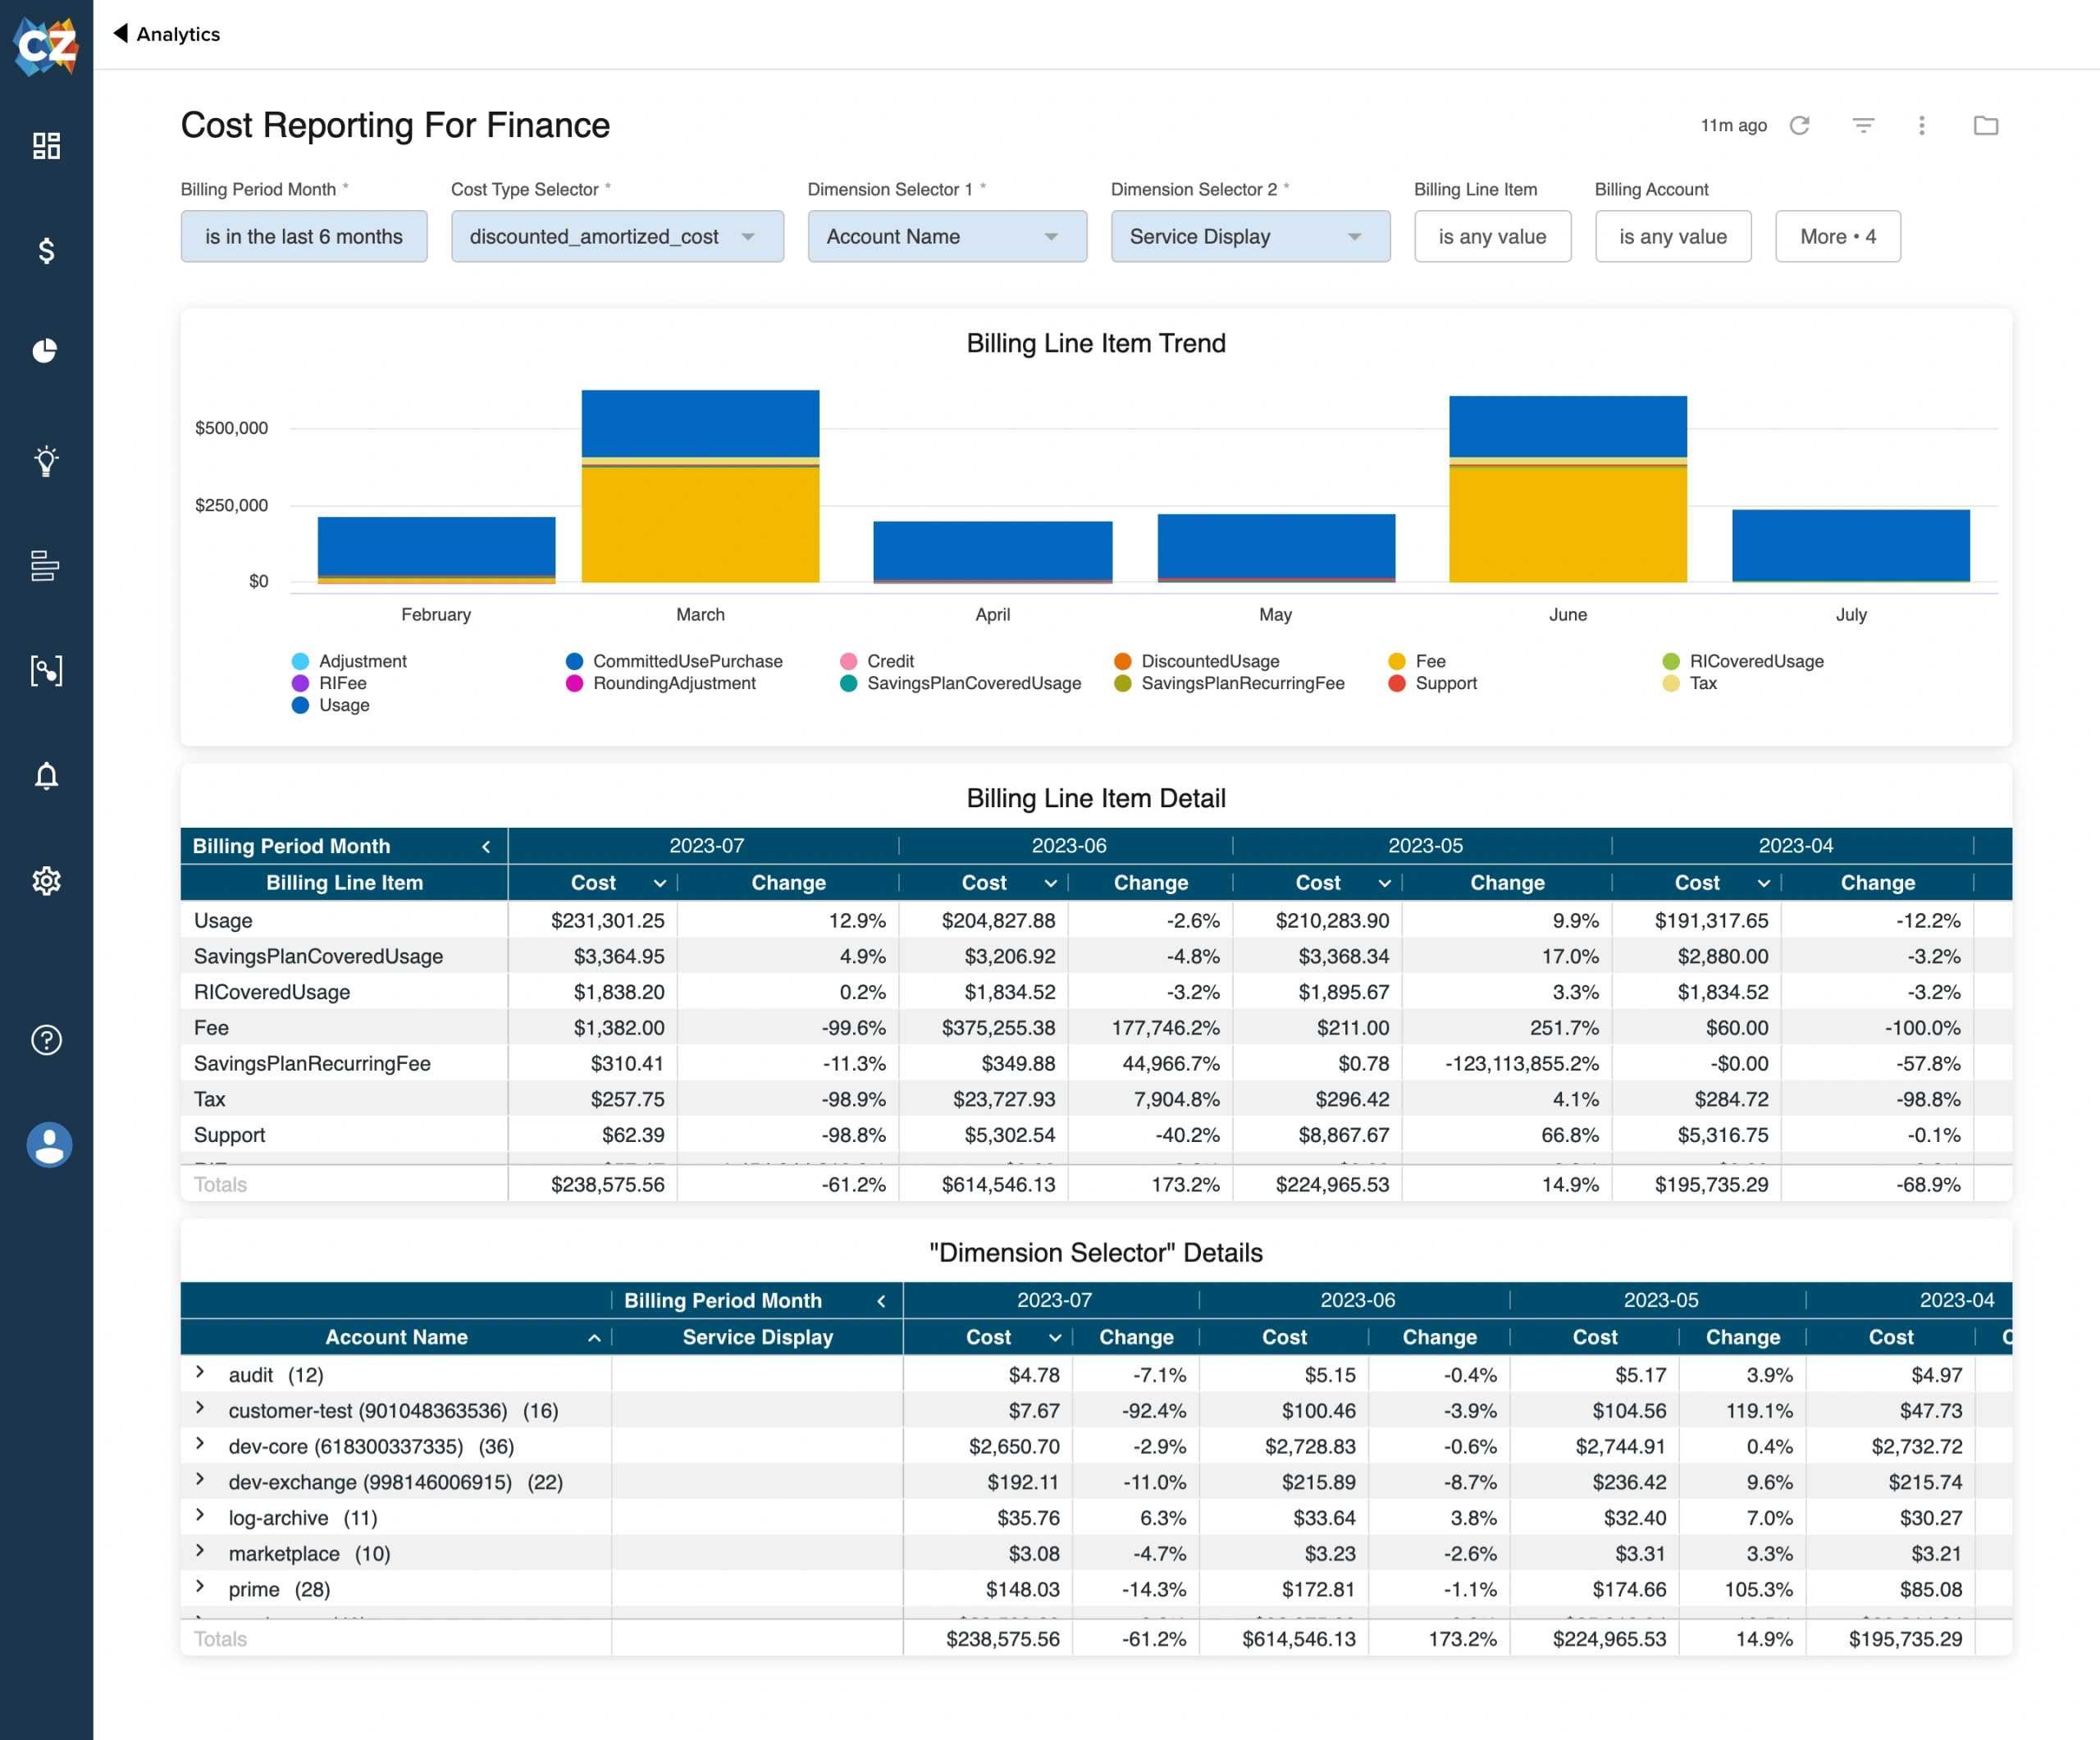 Cost Reporting For Finance